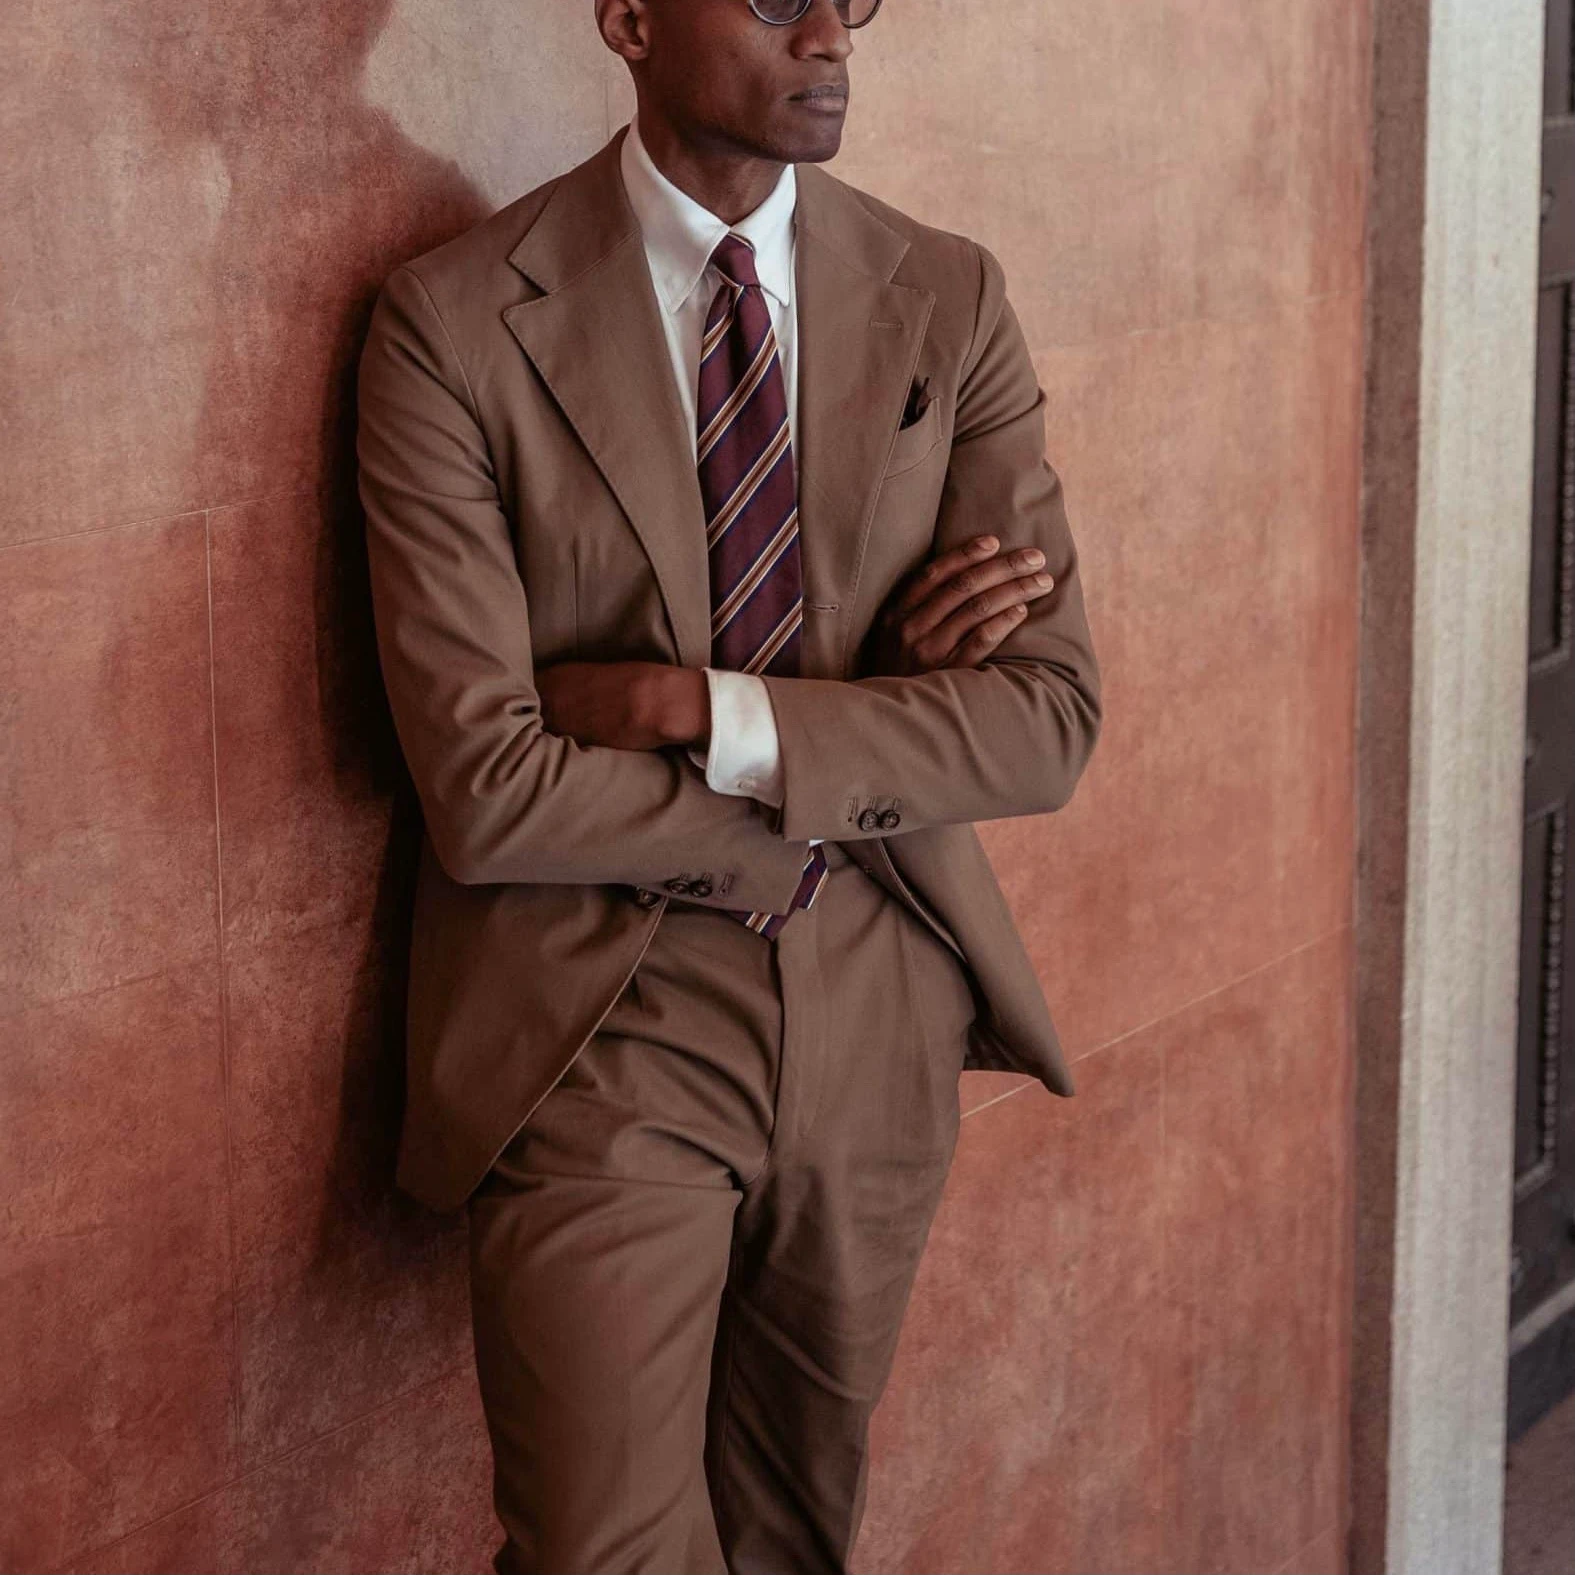 Man leaning against wall, standing with his arms crossed. He's wearing a taupe cotton suit, a white shirt and a striped burgundy tie